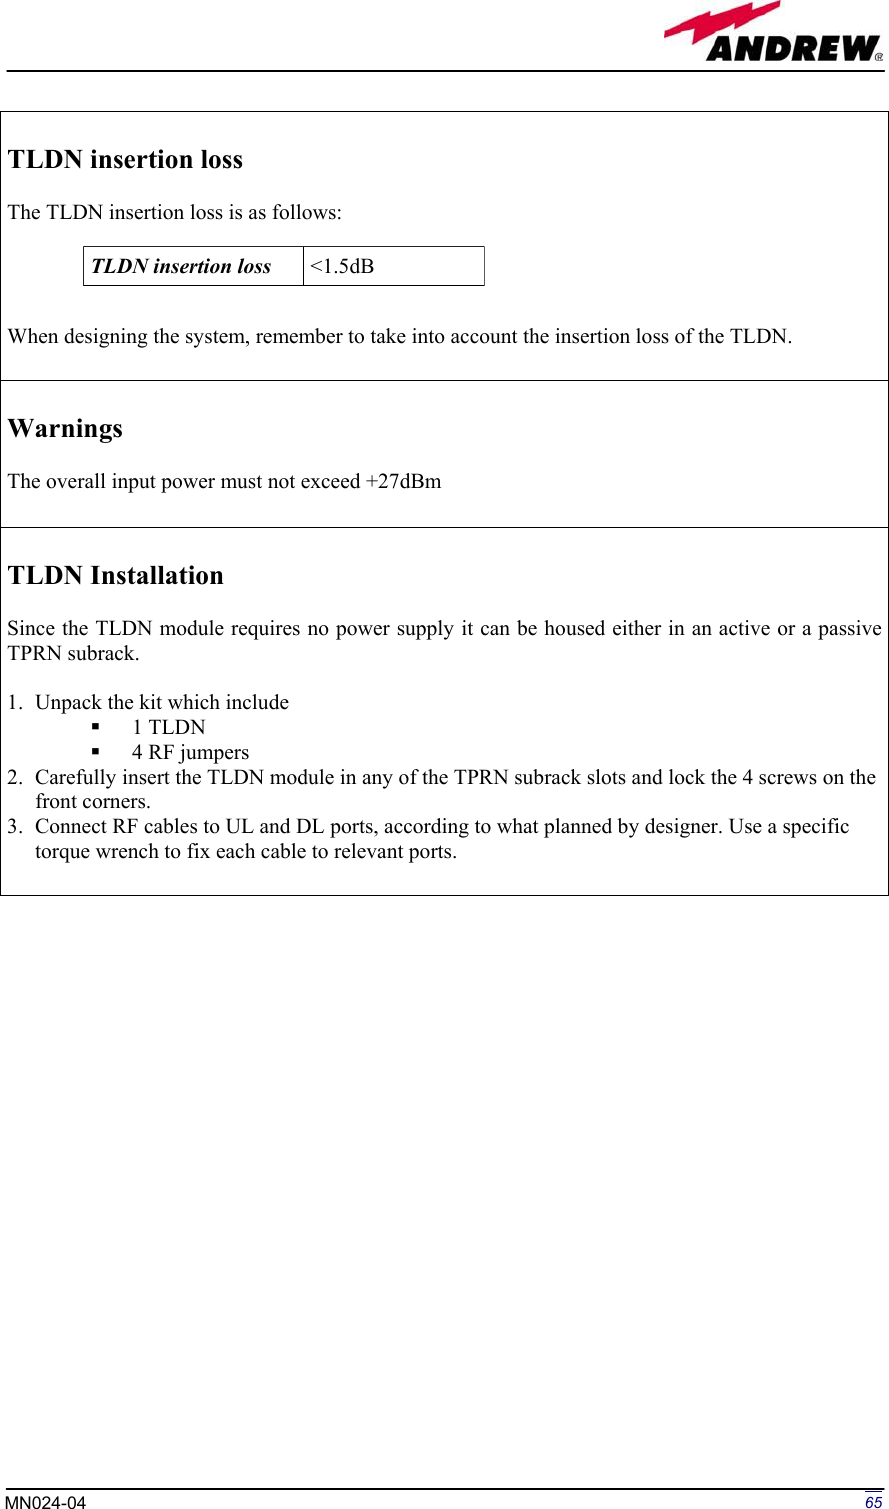 Page 65 of Andrew Wireless Innovations Group BCP-TFAM23 Model TFAM23 Downlink Booster User Manual MN024 04 rev3